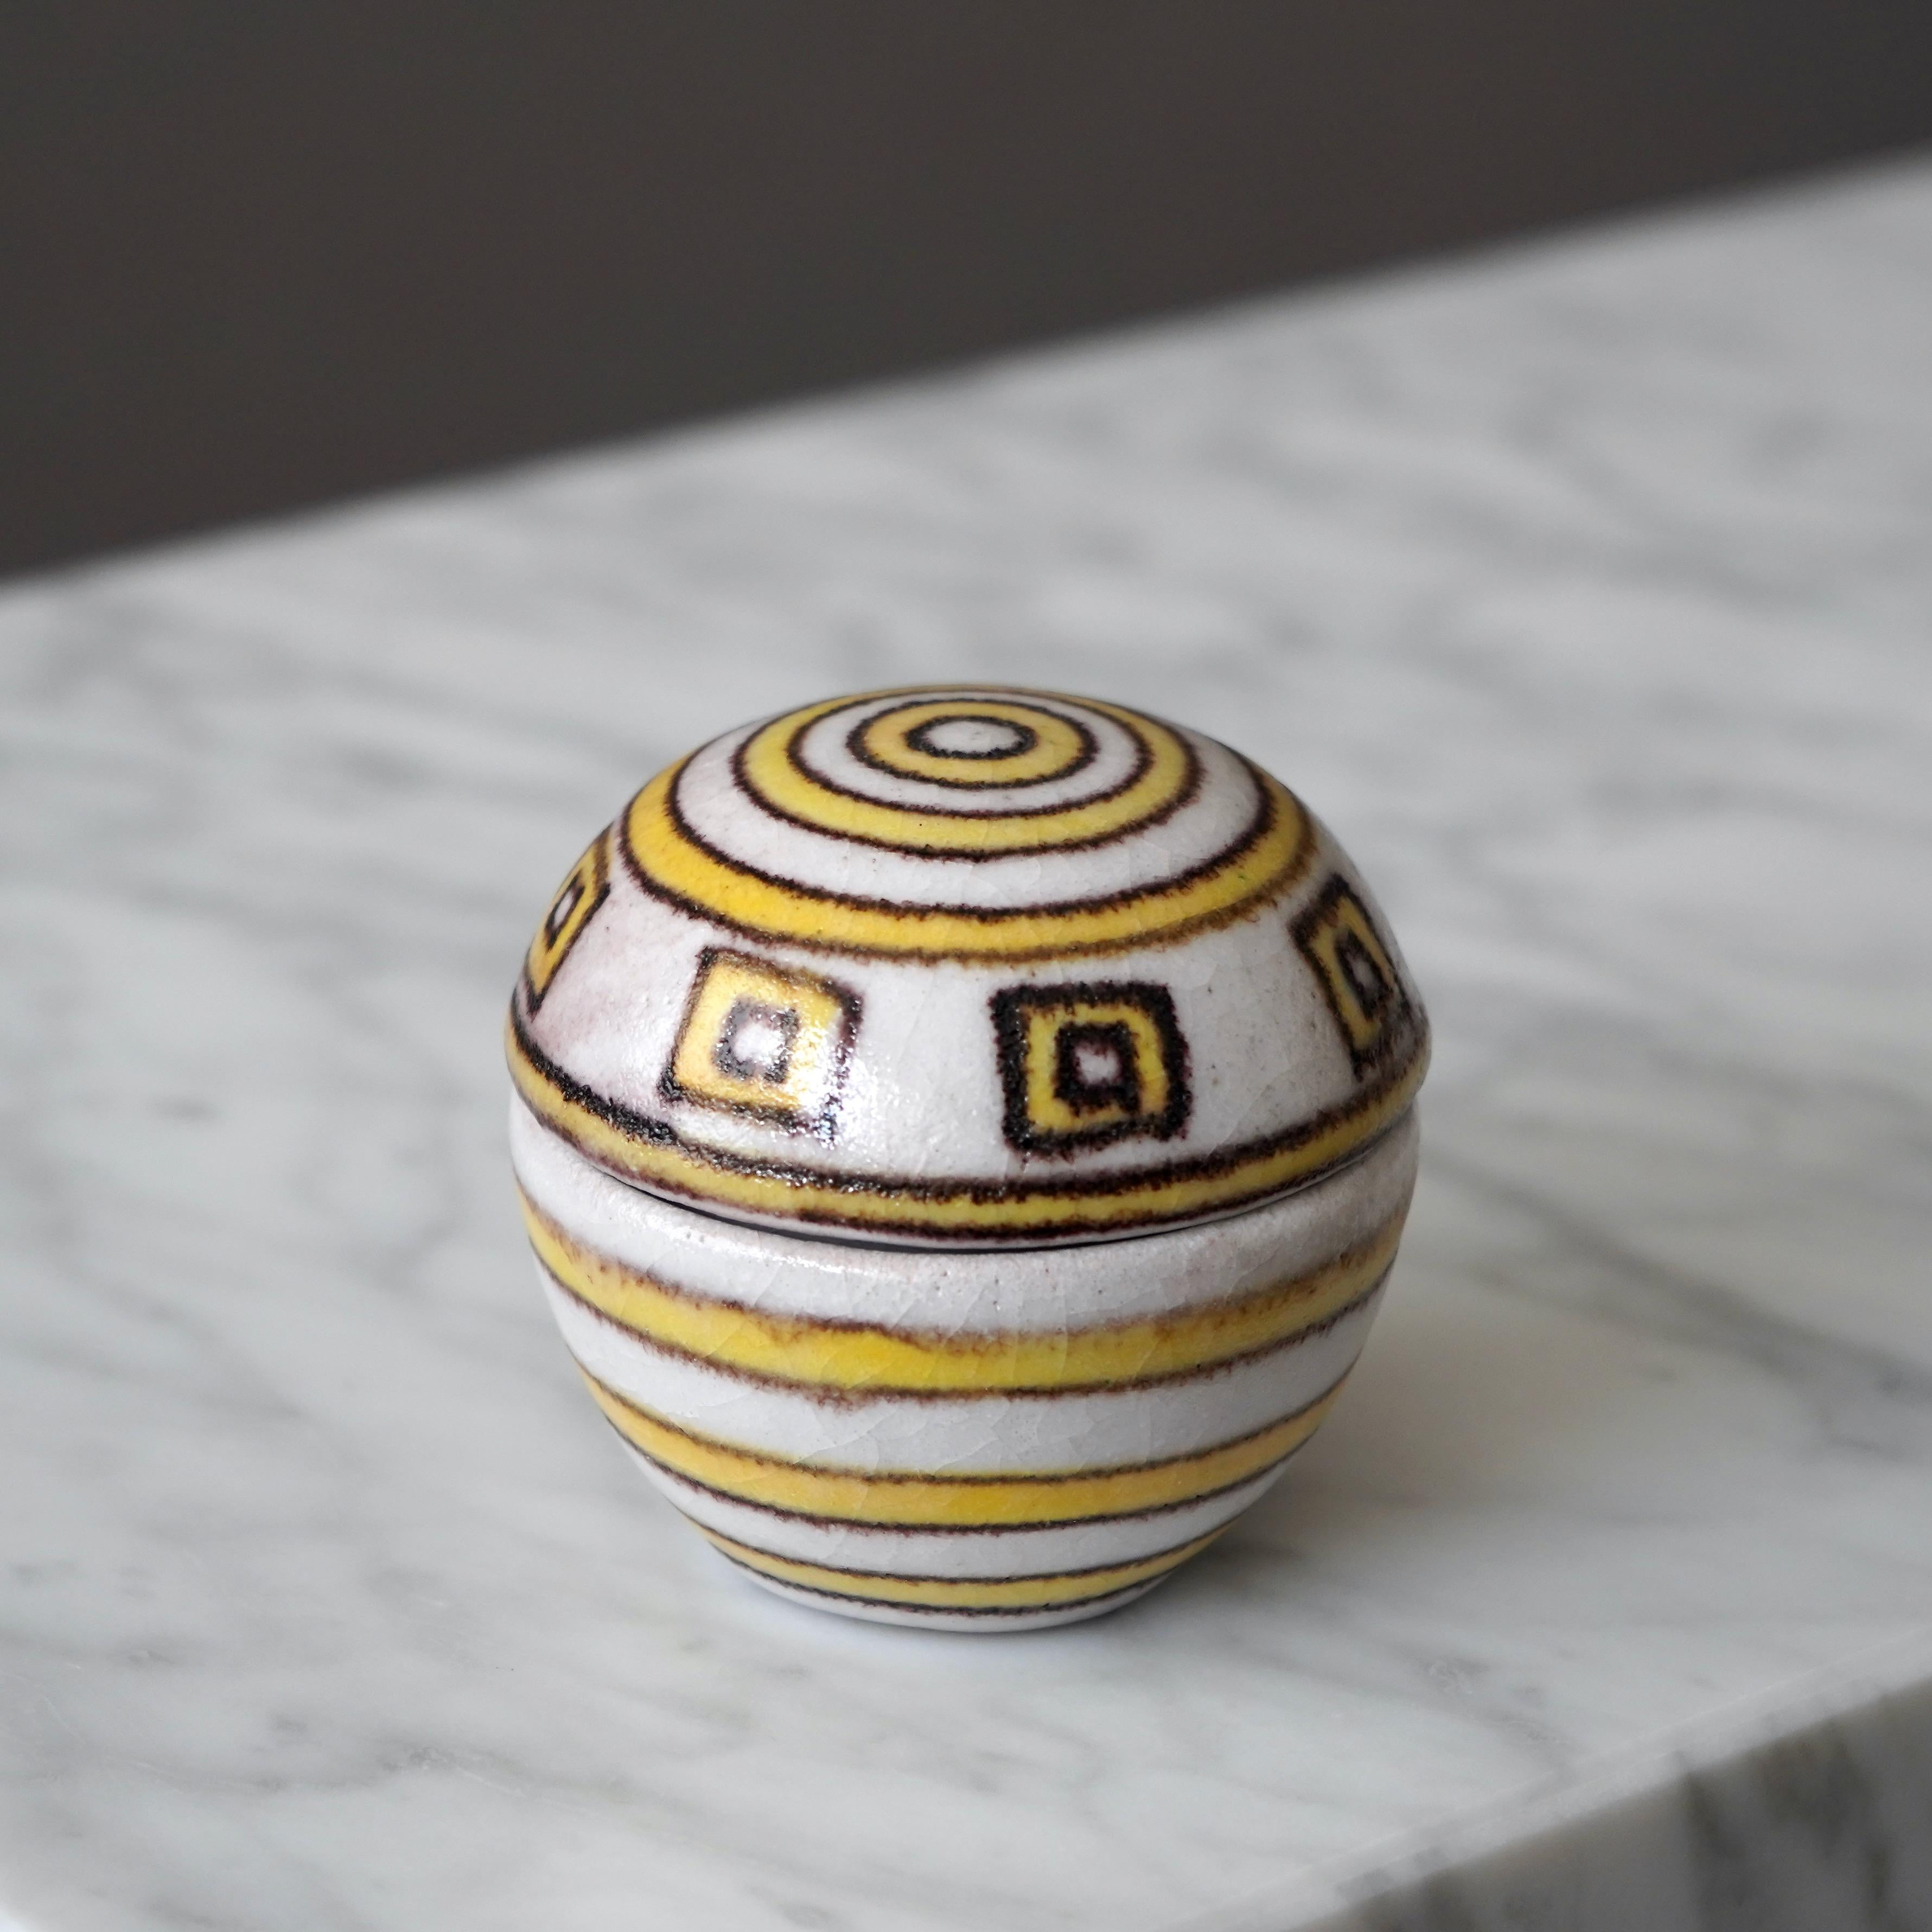 Italian Unique Lidded Ceramic Boxes by Guido Gambone. Florence, Italy, 1950s